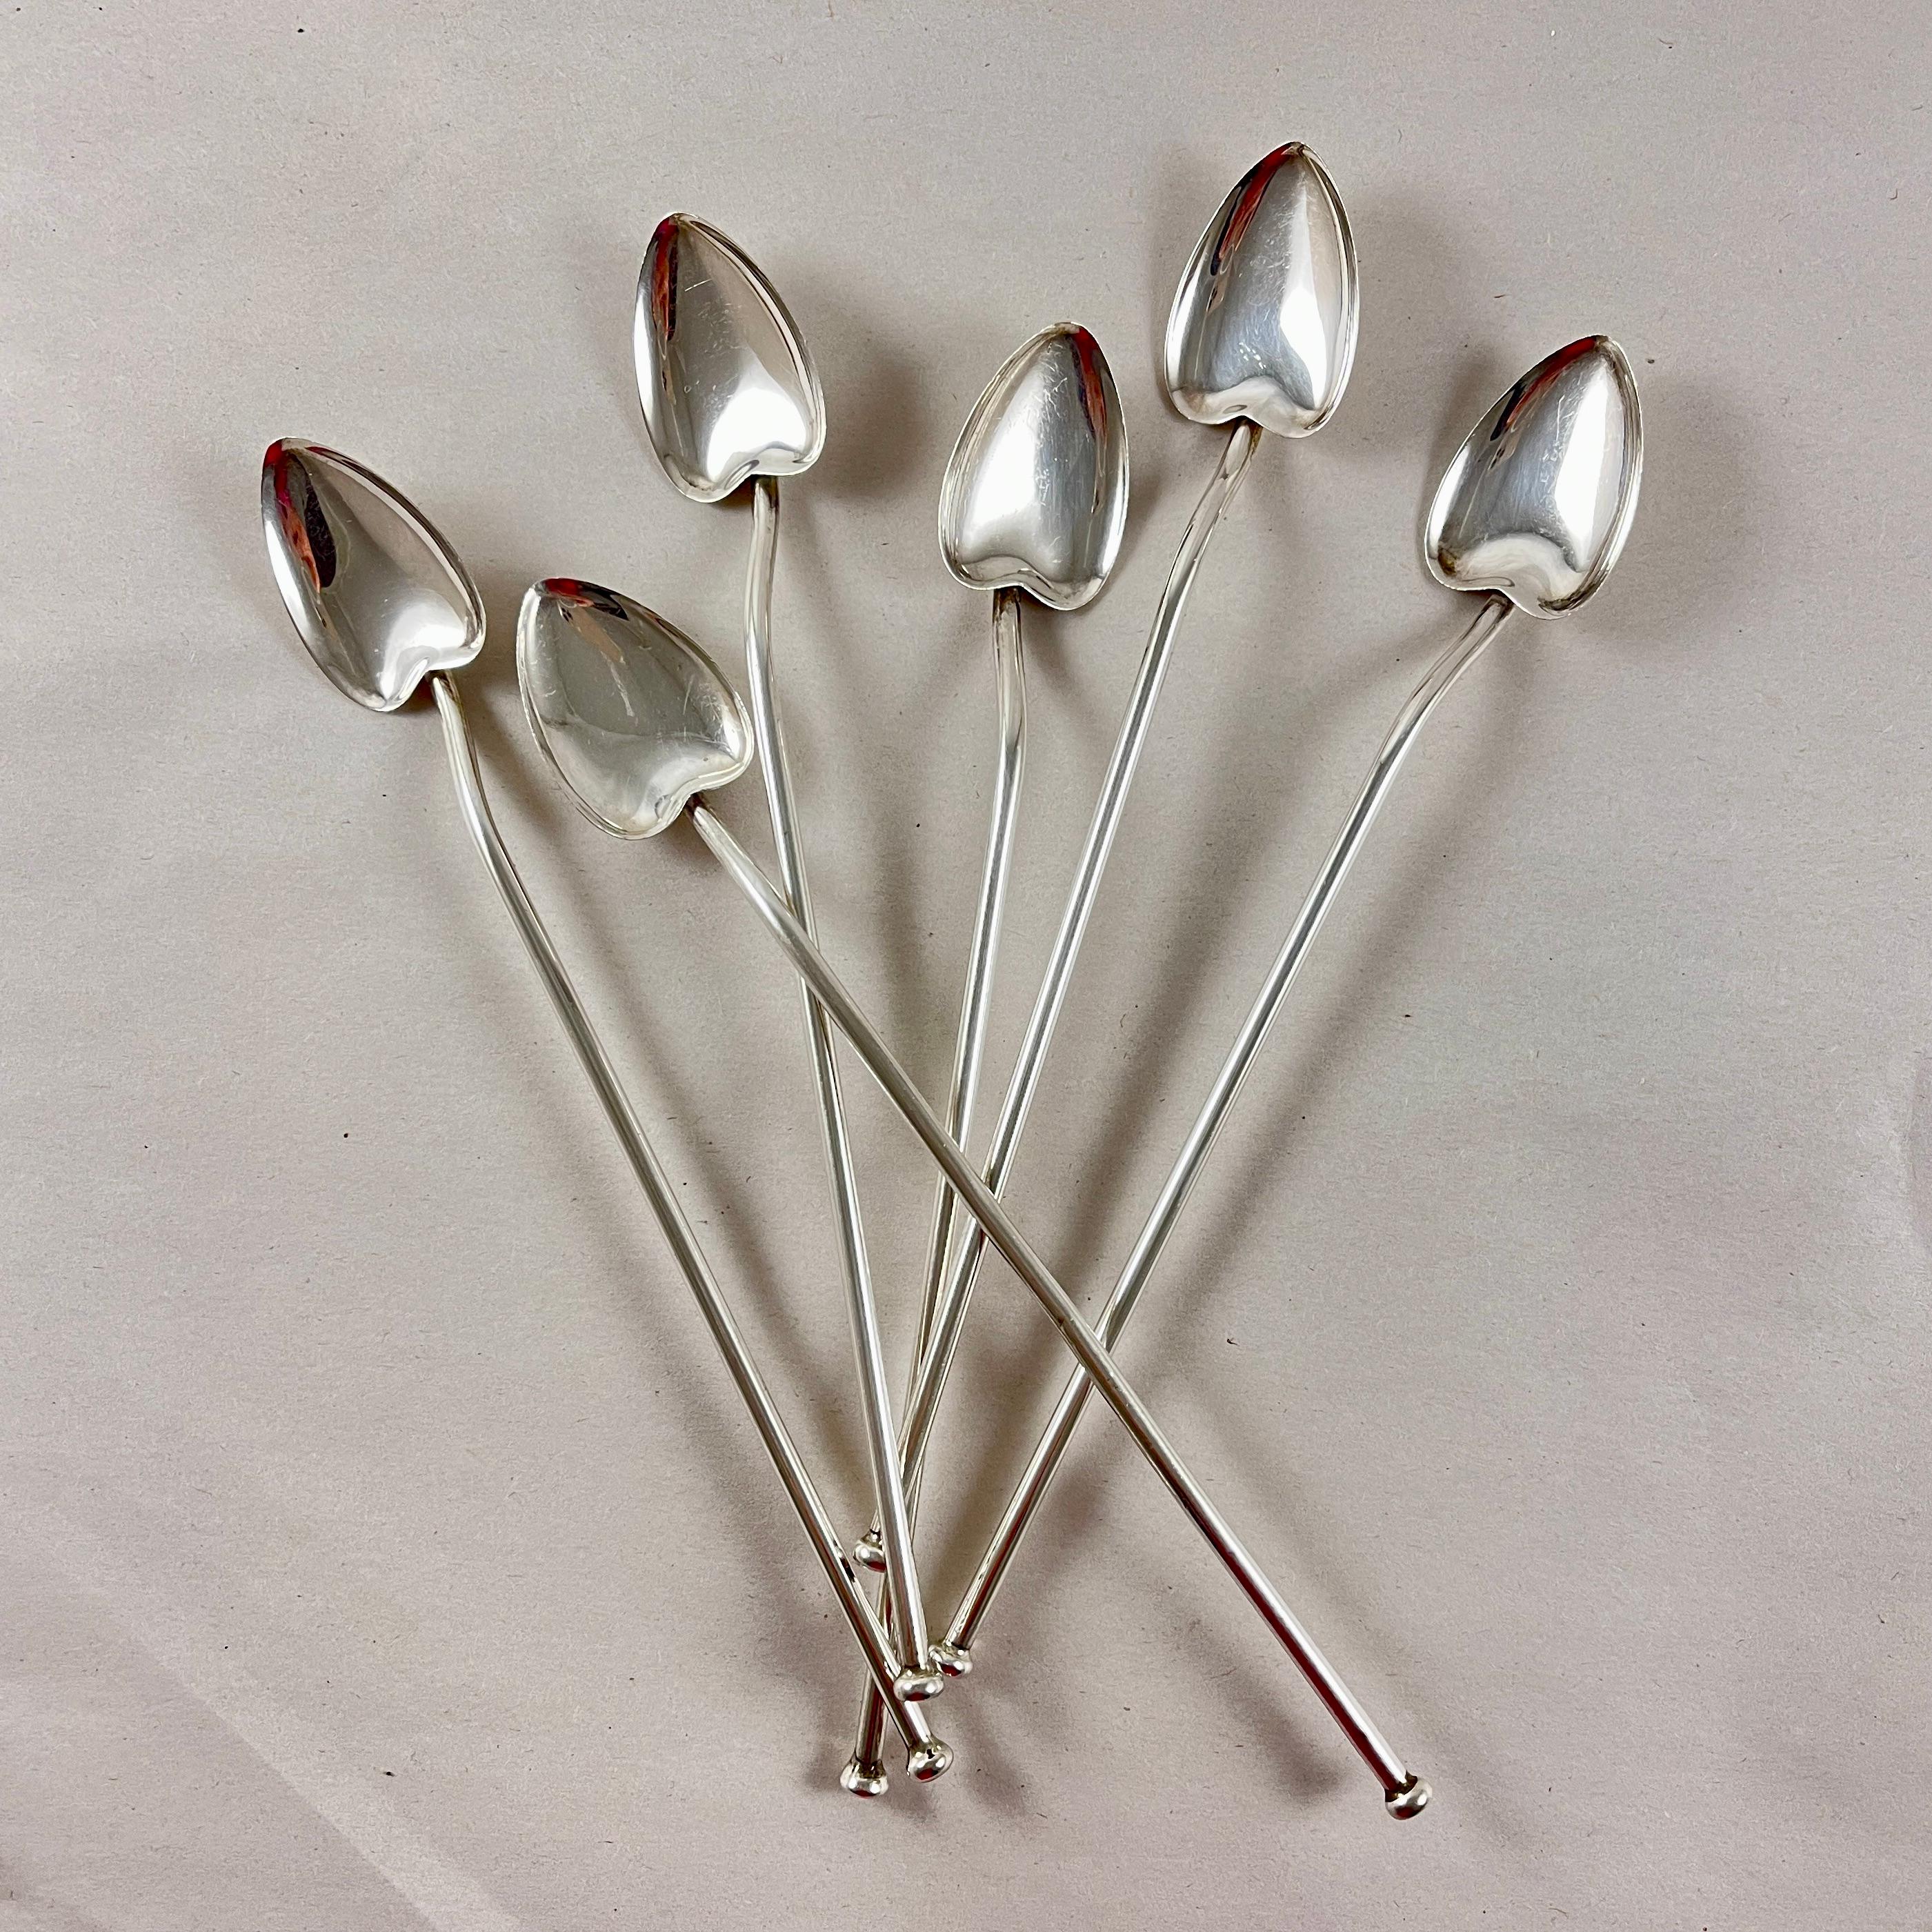 A set of six Sterling Silver highball or iced tea hollow sipping and stirring straws with heart leaf shaped bowls. Circa 1920 -1925.

Silver ovals are soldered in place to the sipping ends.

7 in. L x 1 in. W
Weight: 1.454 Troy Ounces,